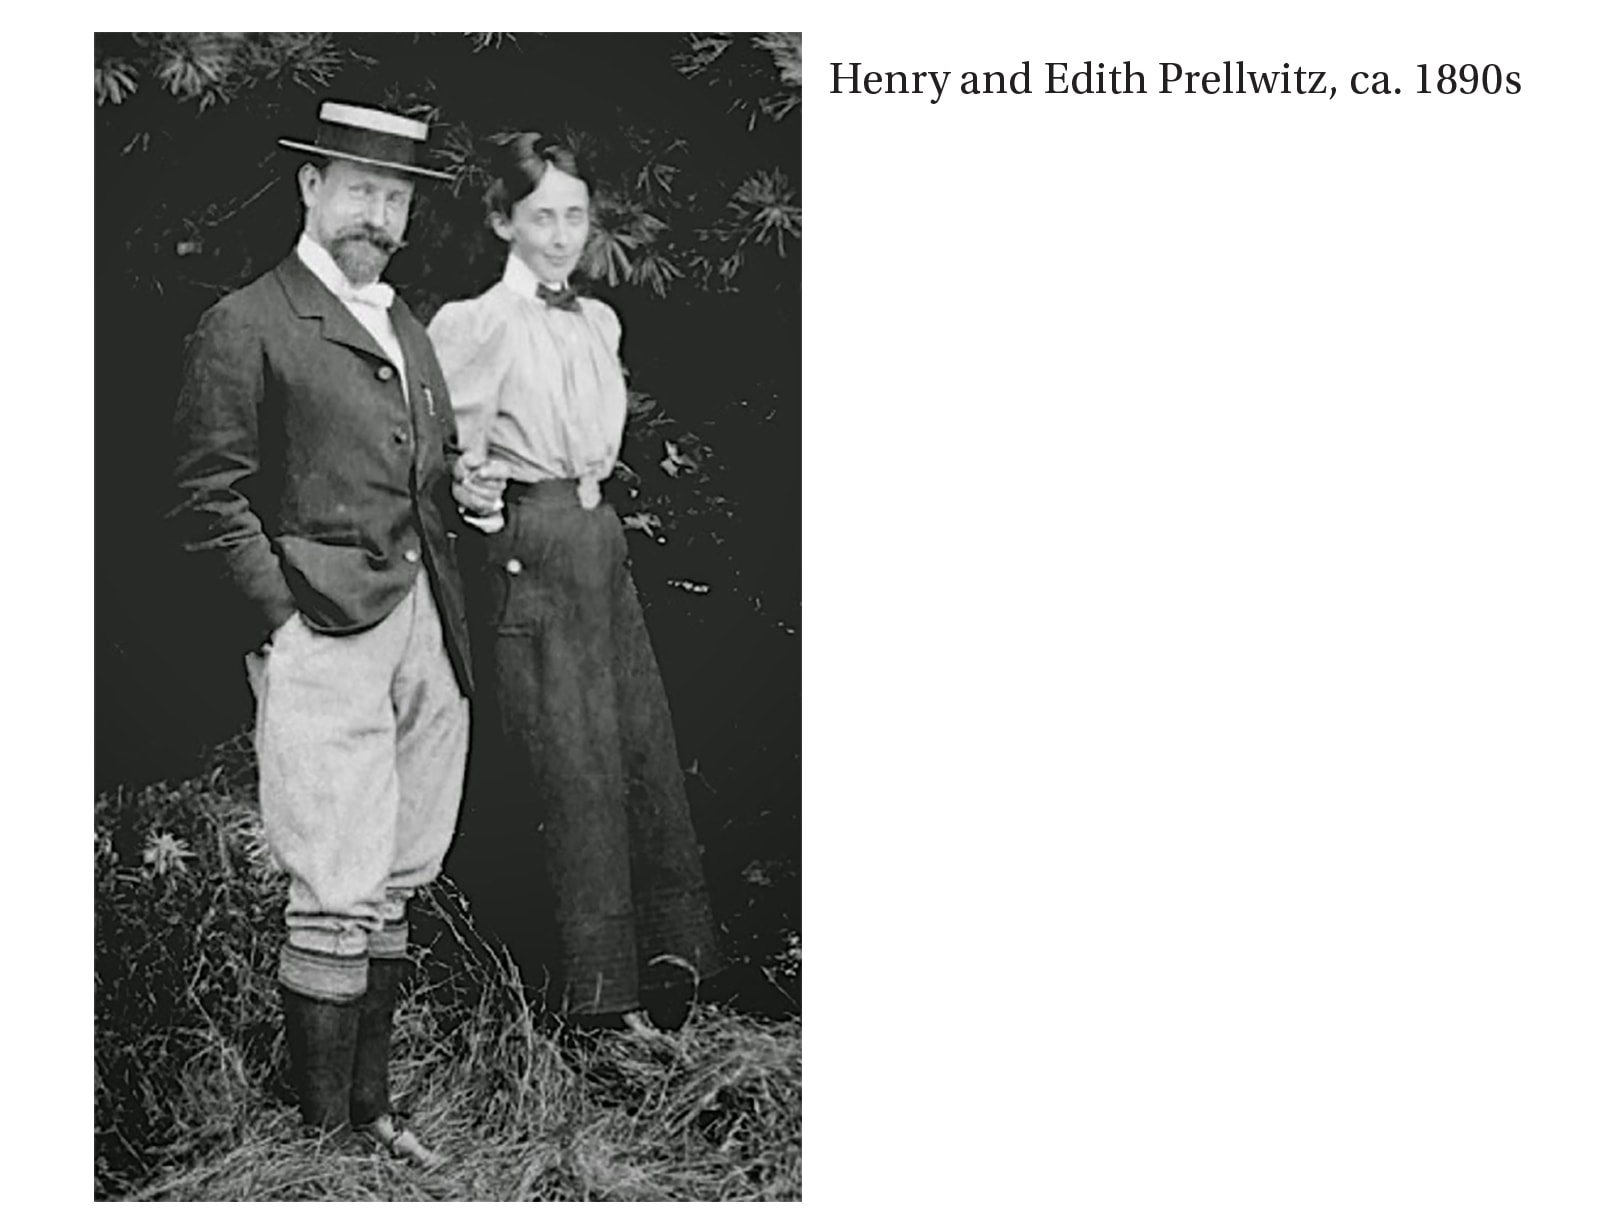 Henry and Edith Prellwitz ca 1890s black and white photograph